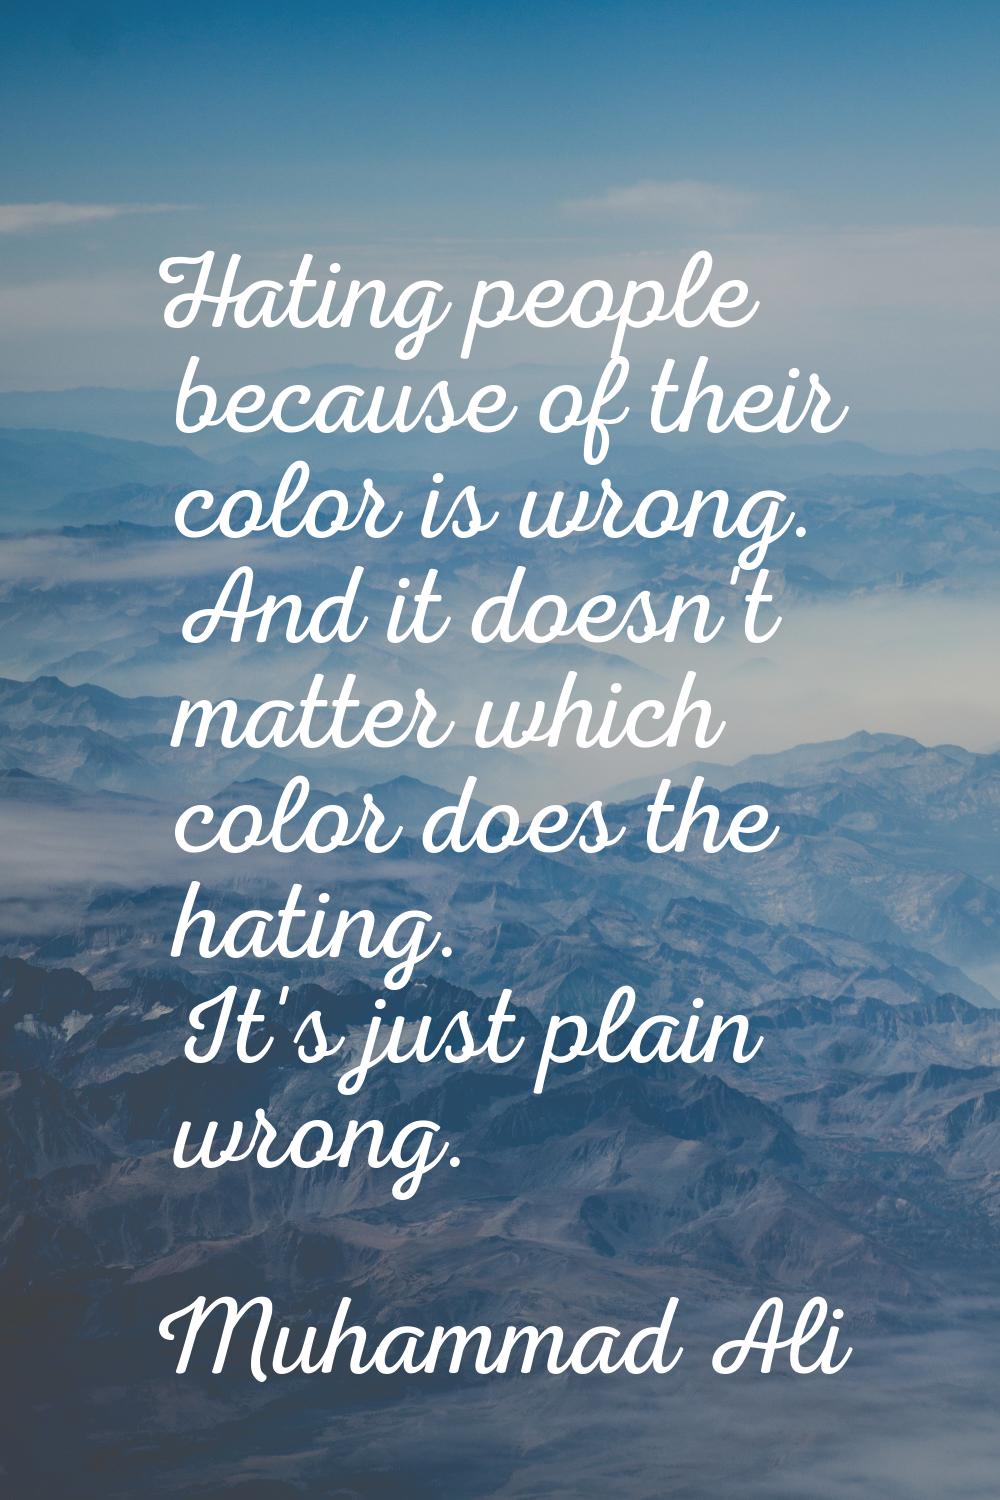 Hating people because of their color is wrong. And it doesn't matter which color does the hating. I